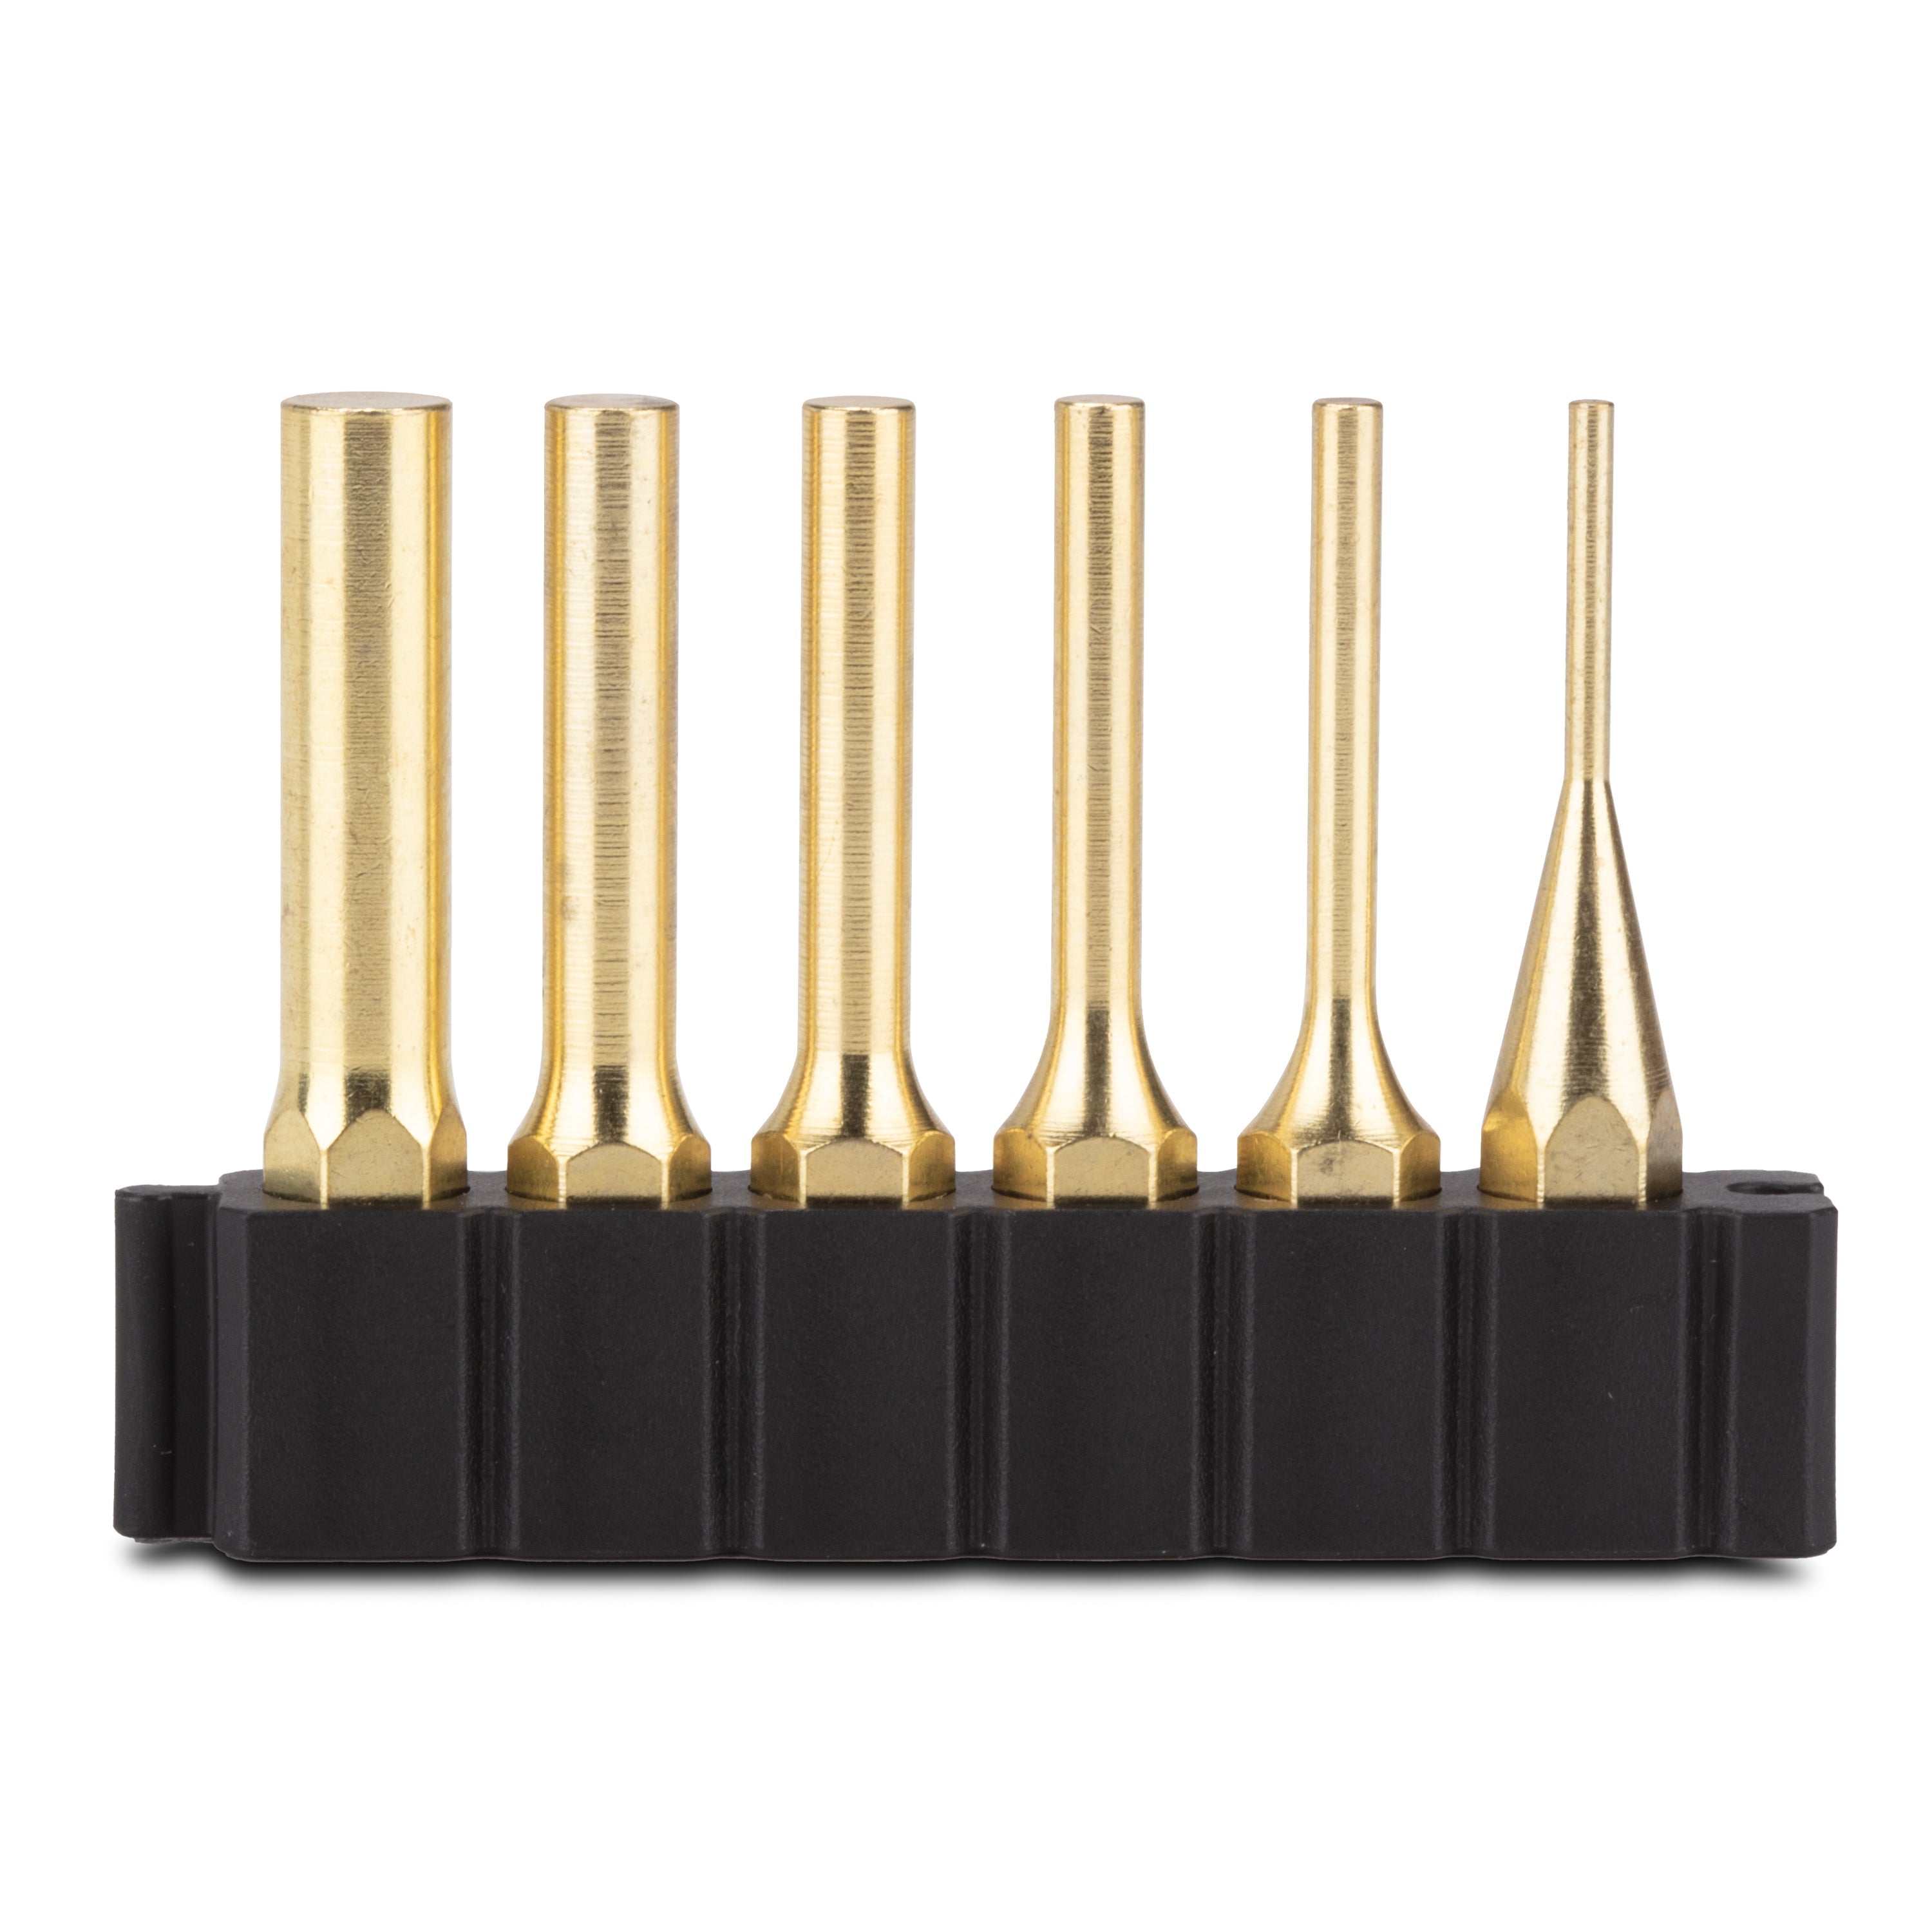 BPRS20 Industrial Pin Punch Set - Brass Tips